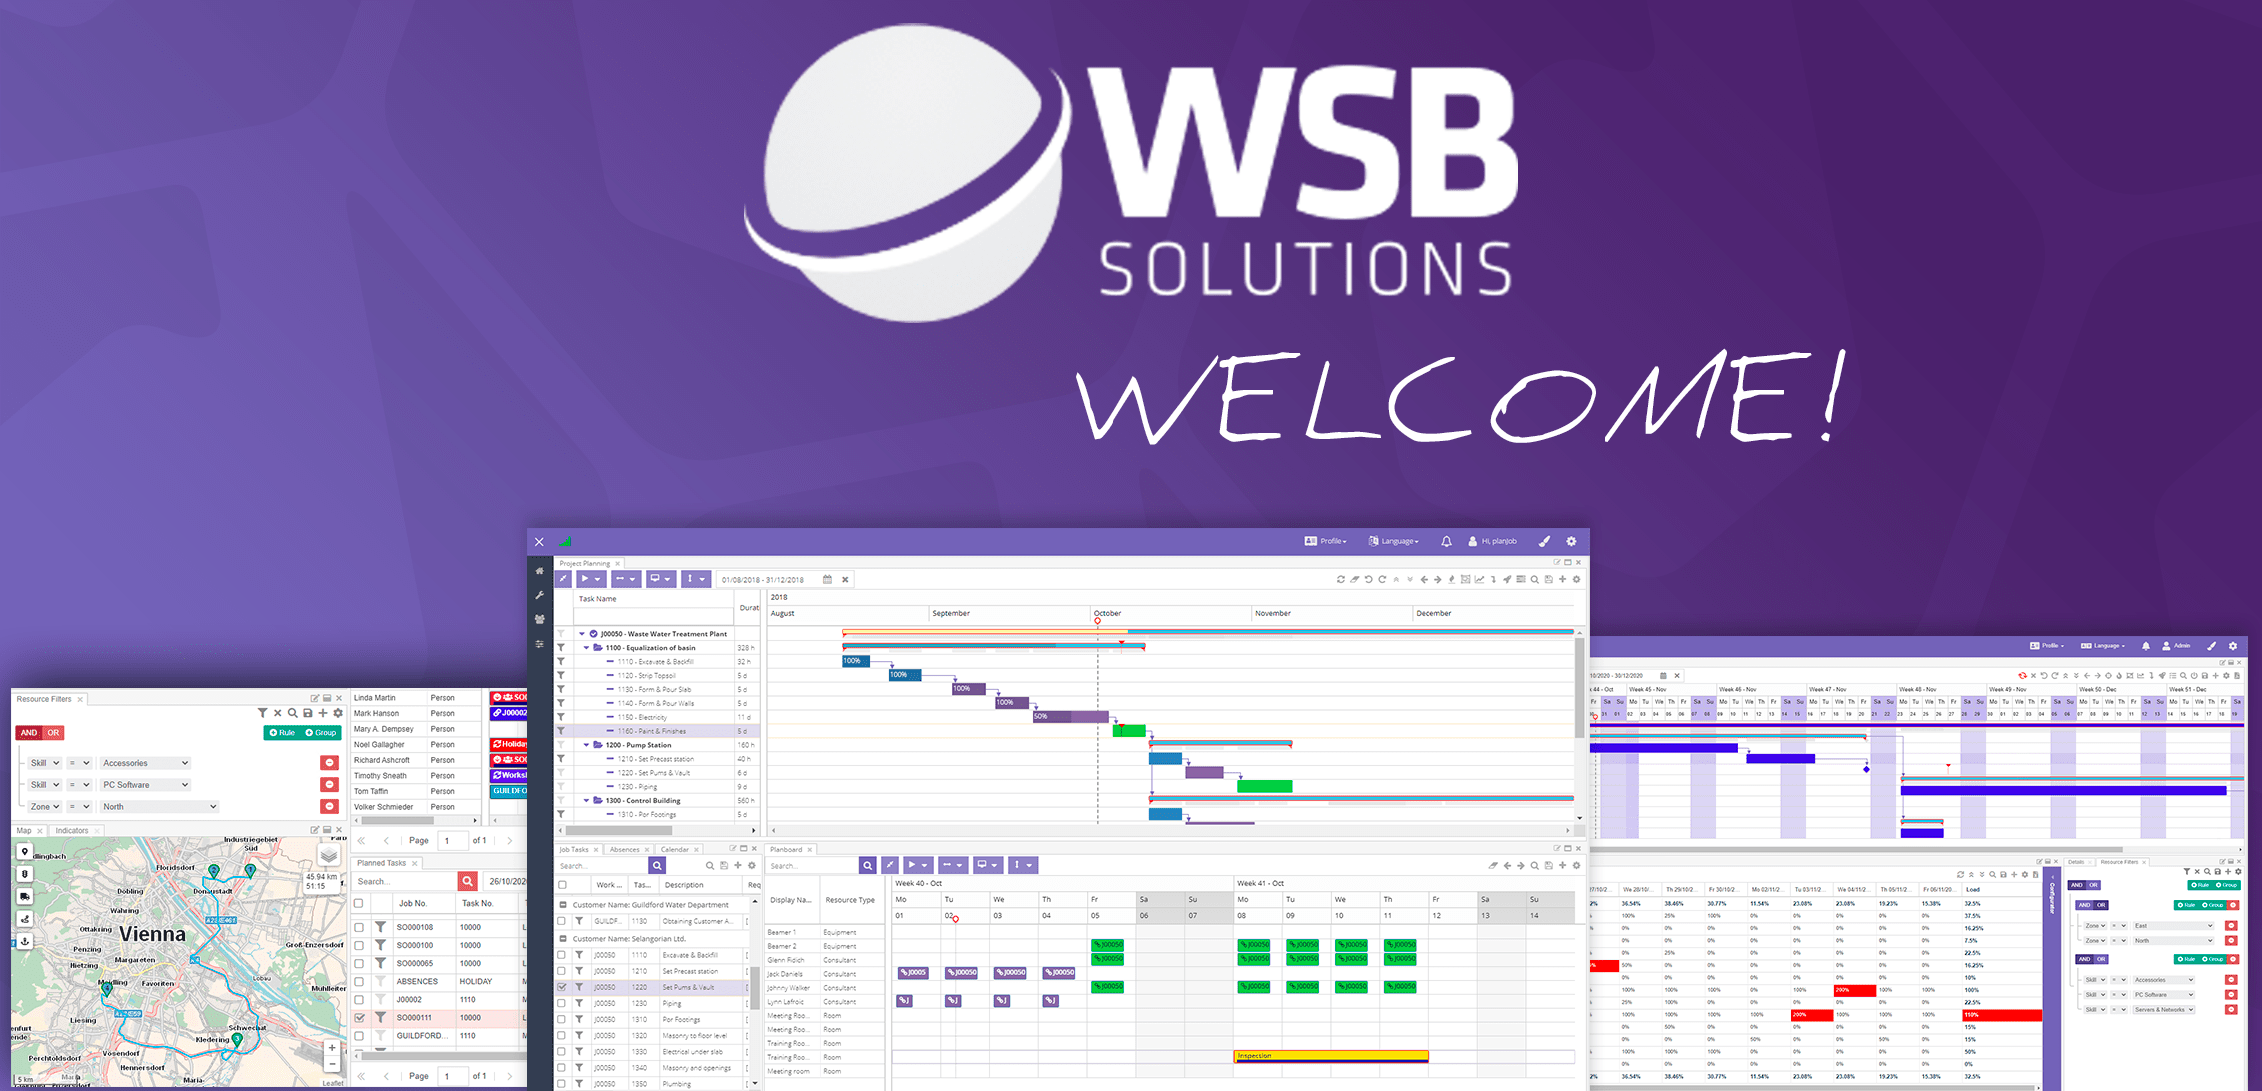 ds-reseller-wsb-welcome.png